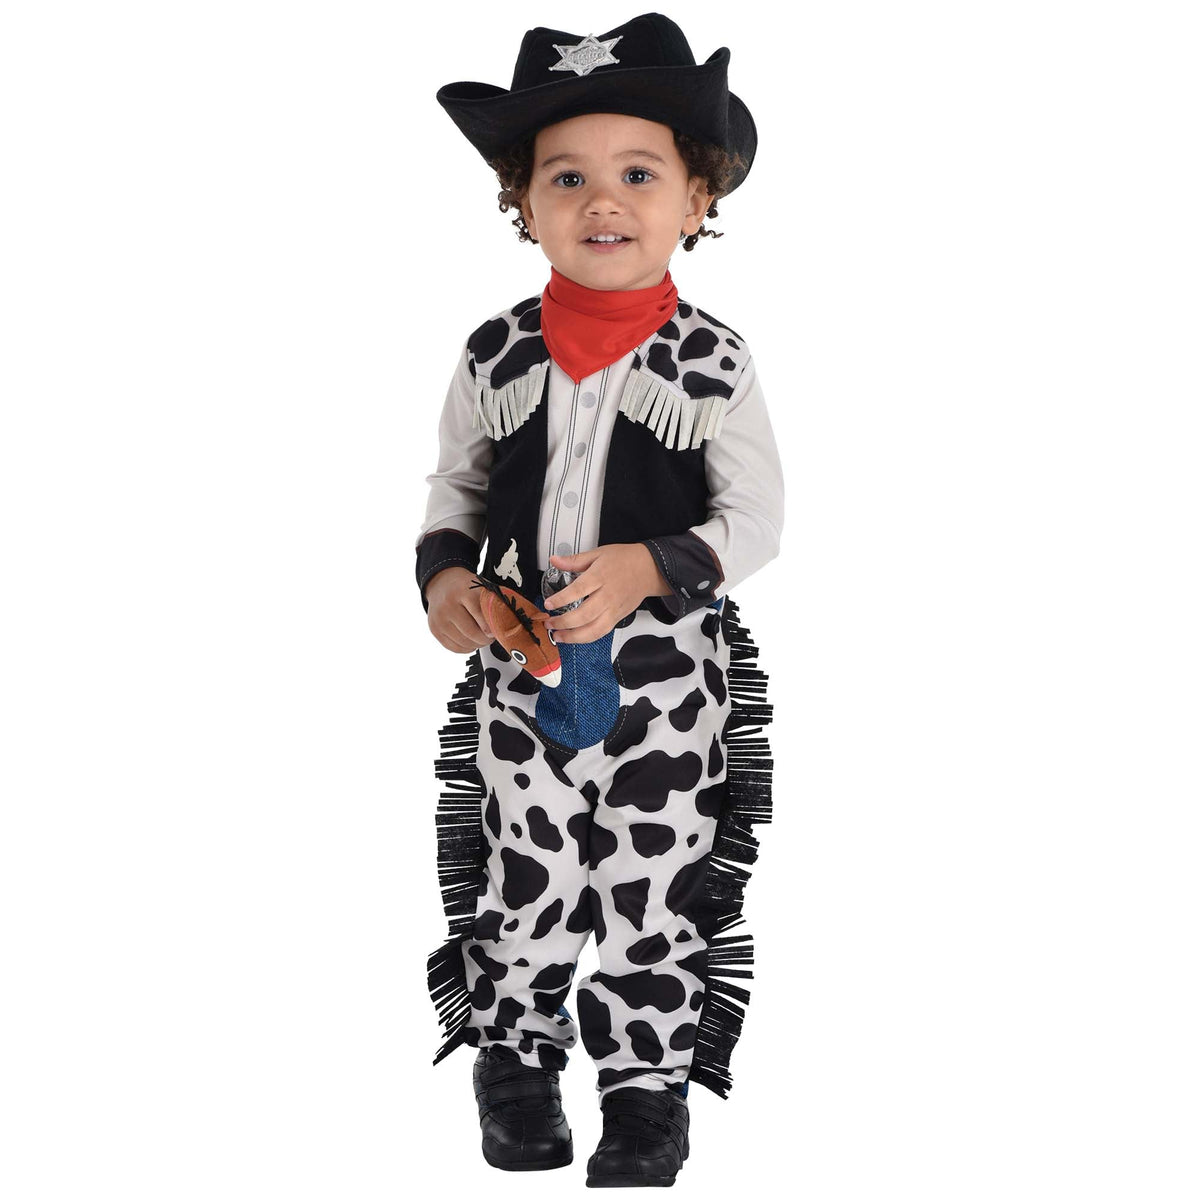 HALLOWEEN COSTUME CO. Costumes Western Costume for Toddlers